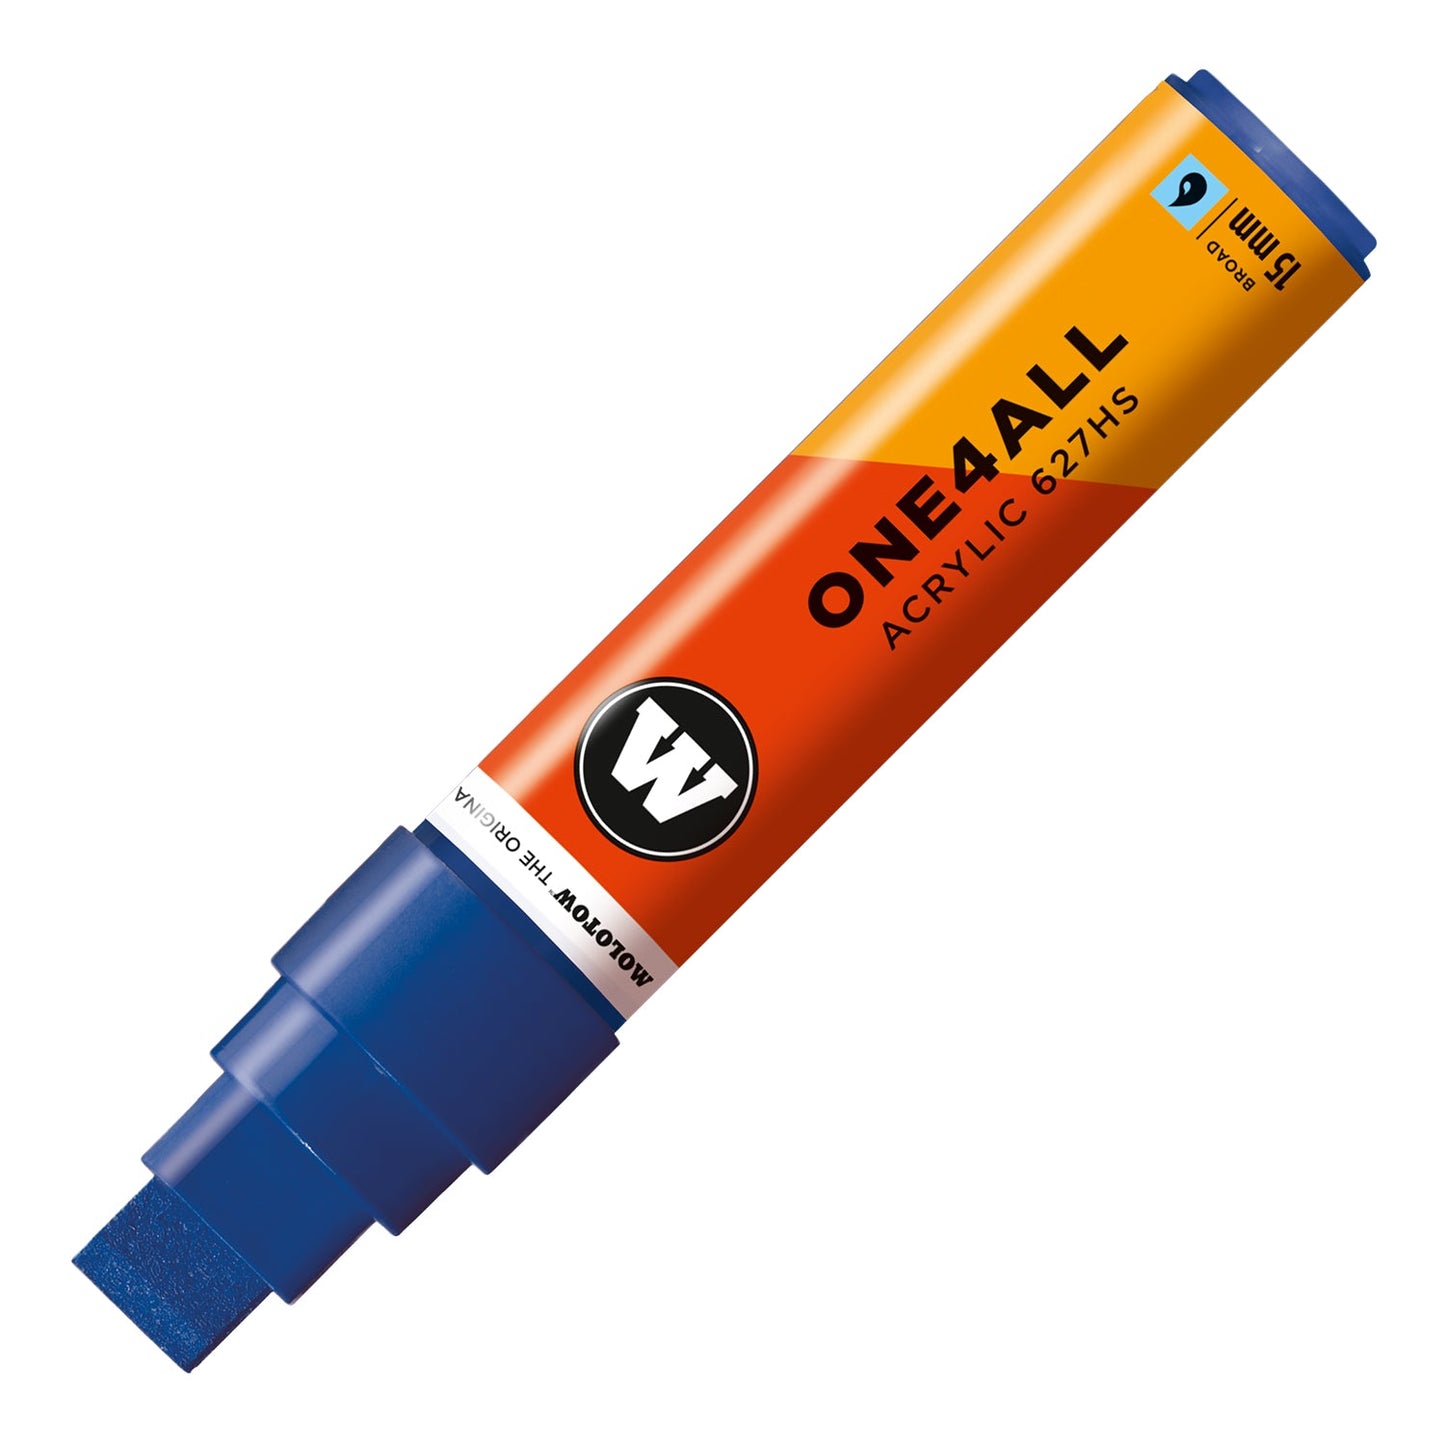 Molotow ONE4ALL 627HS 15 mm acrylstift